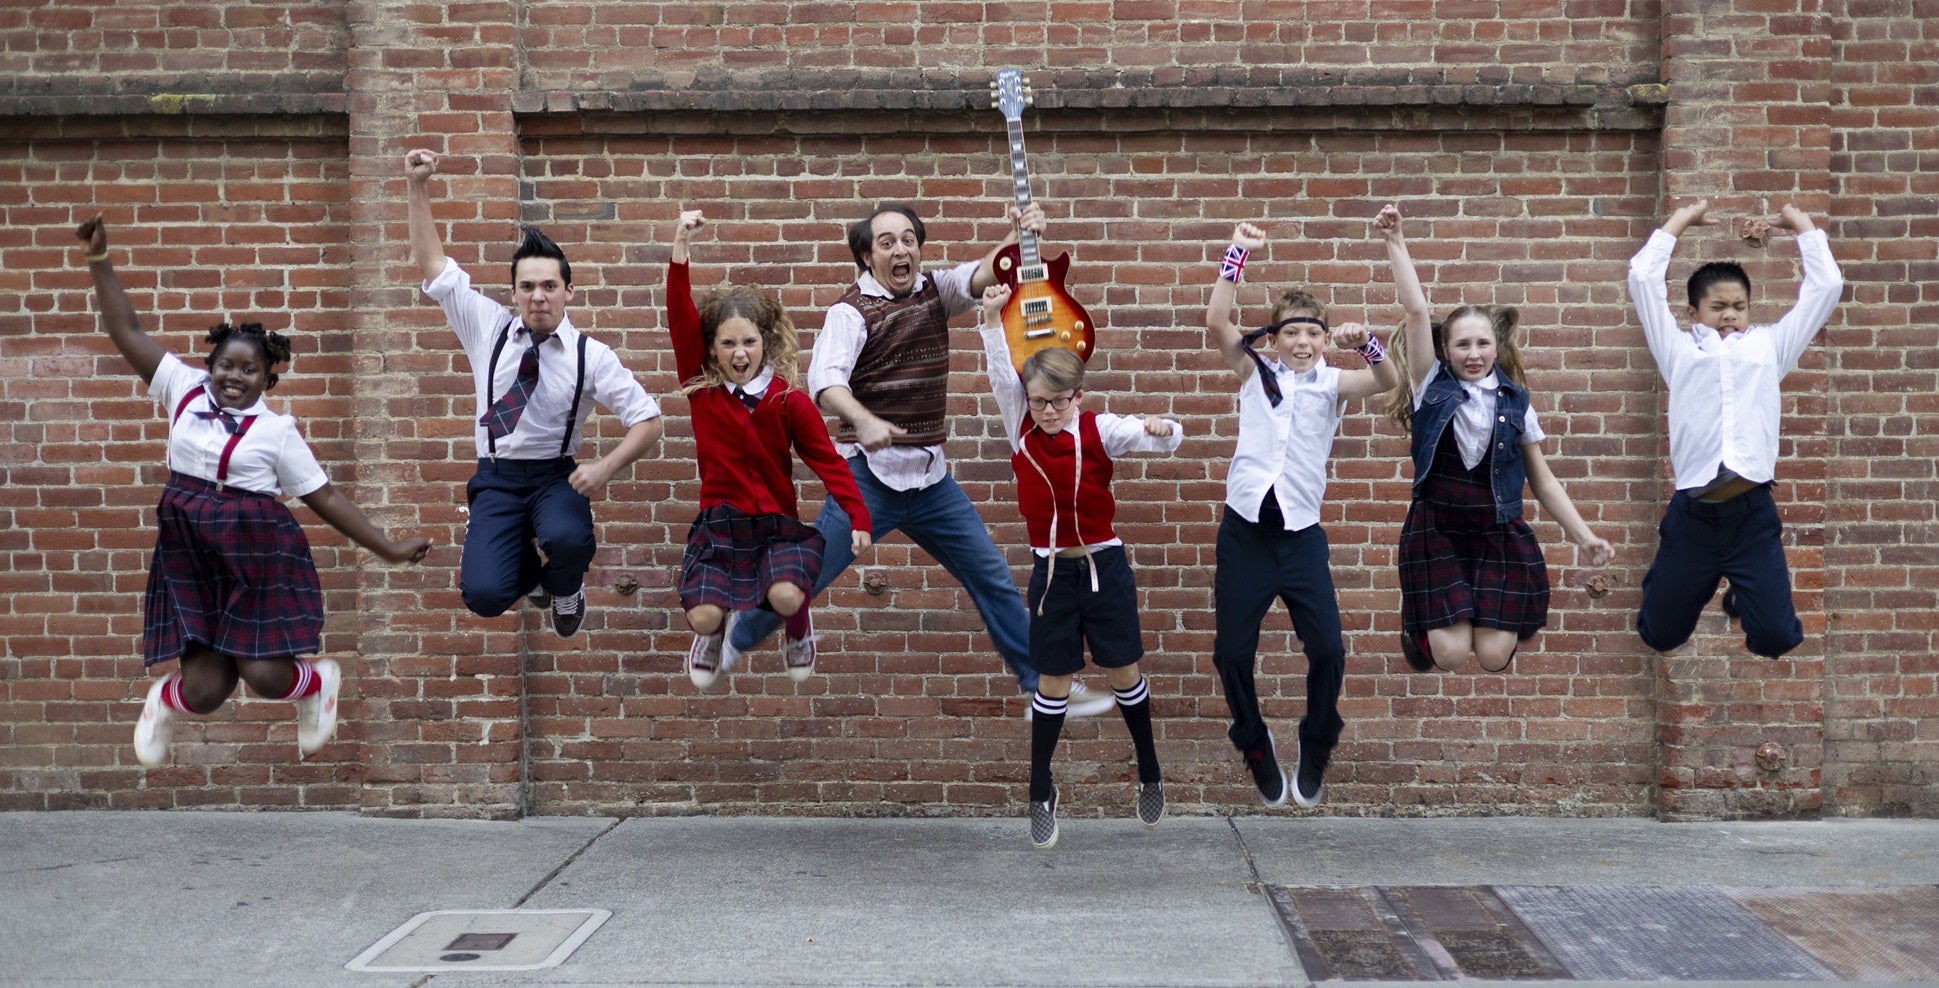 Student actors in costume jumping into air in front of a brick wall